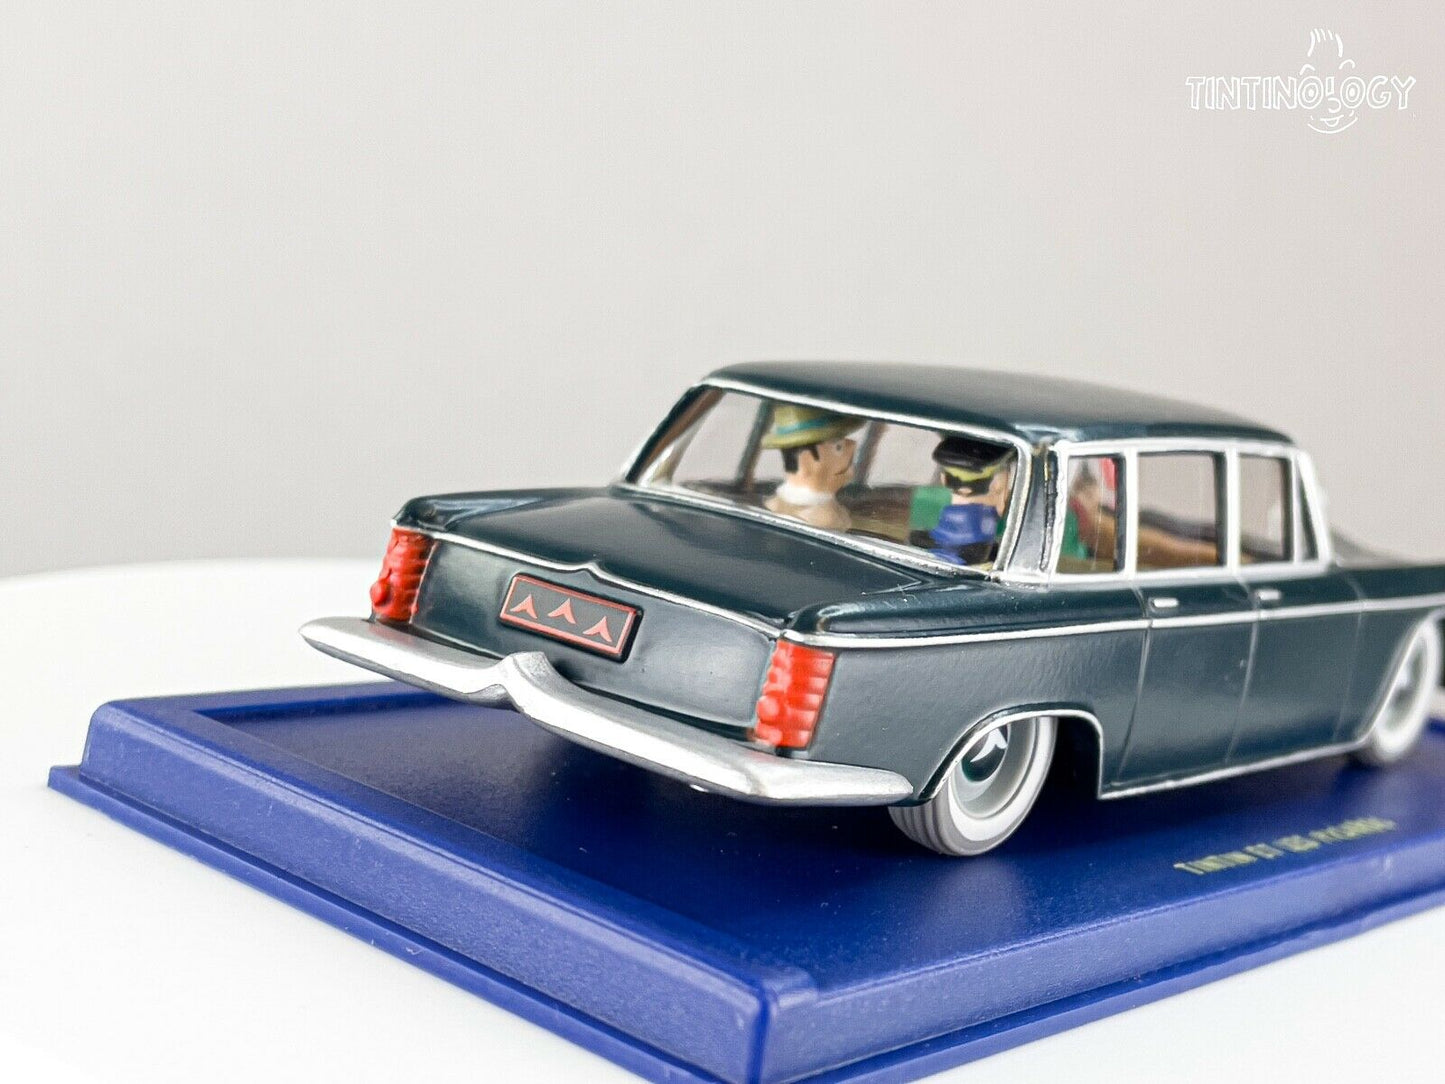 ATLAS TINTIN CAR # 11 Government Limo Picaros Herge model 1/43 Scale Voiture